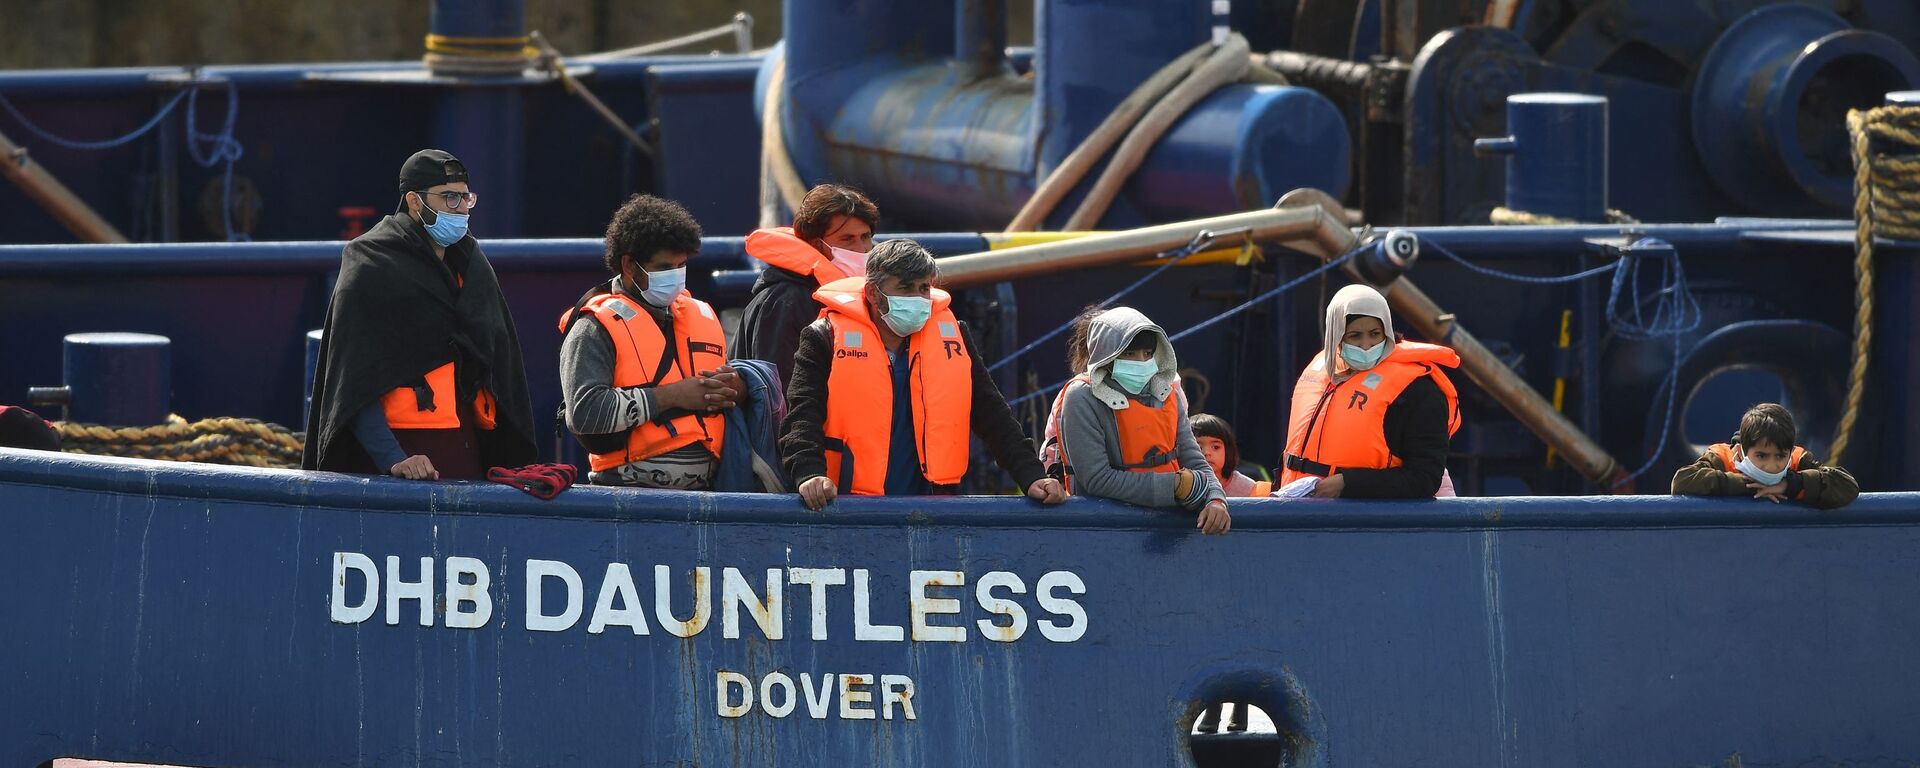 Waleed (3L), 29, a Kuwaiti migrant, stands with other migrants onboard the DHB Dauntless tug boat as they are brought to shore by the UK Border Force after illegally crossing the English Channel from France on a dinghy on September 11, 2020, in the marina at Dover, on the south coast of England - Sputnik International, 1920, 25.11.2021